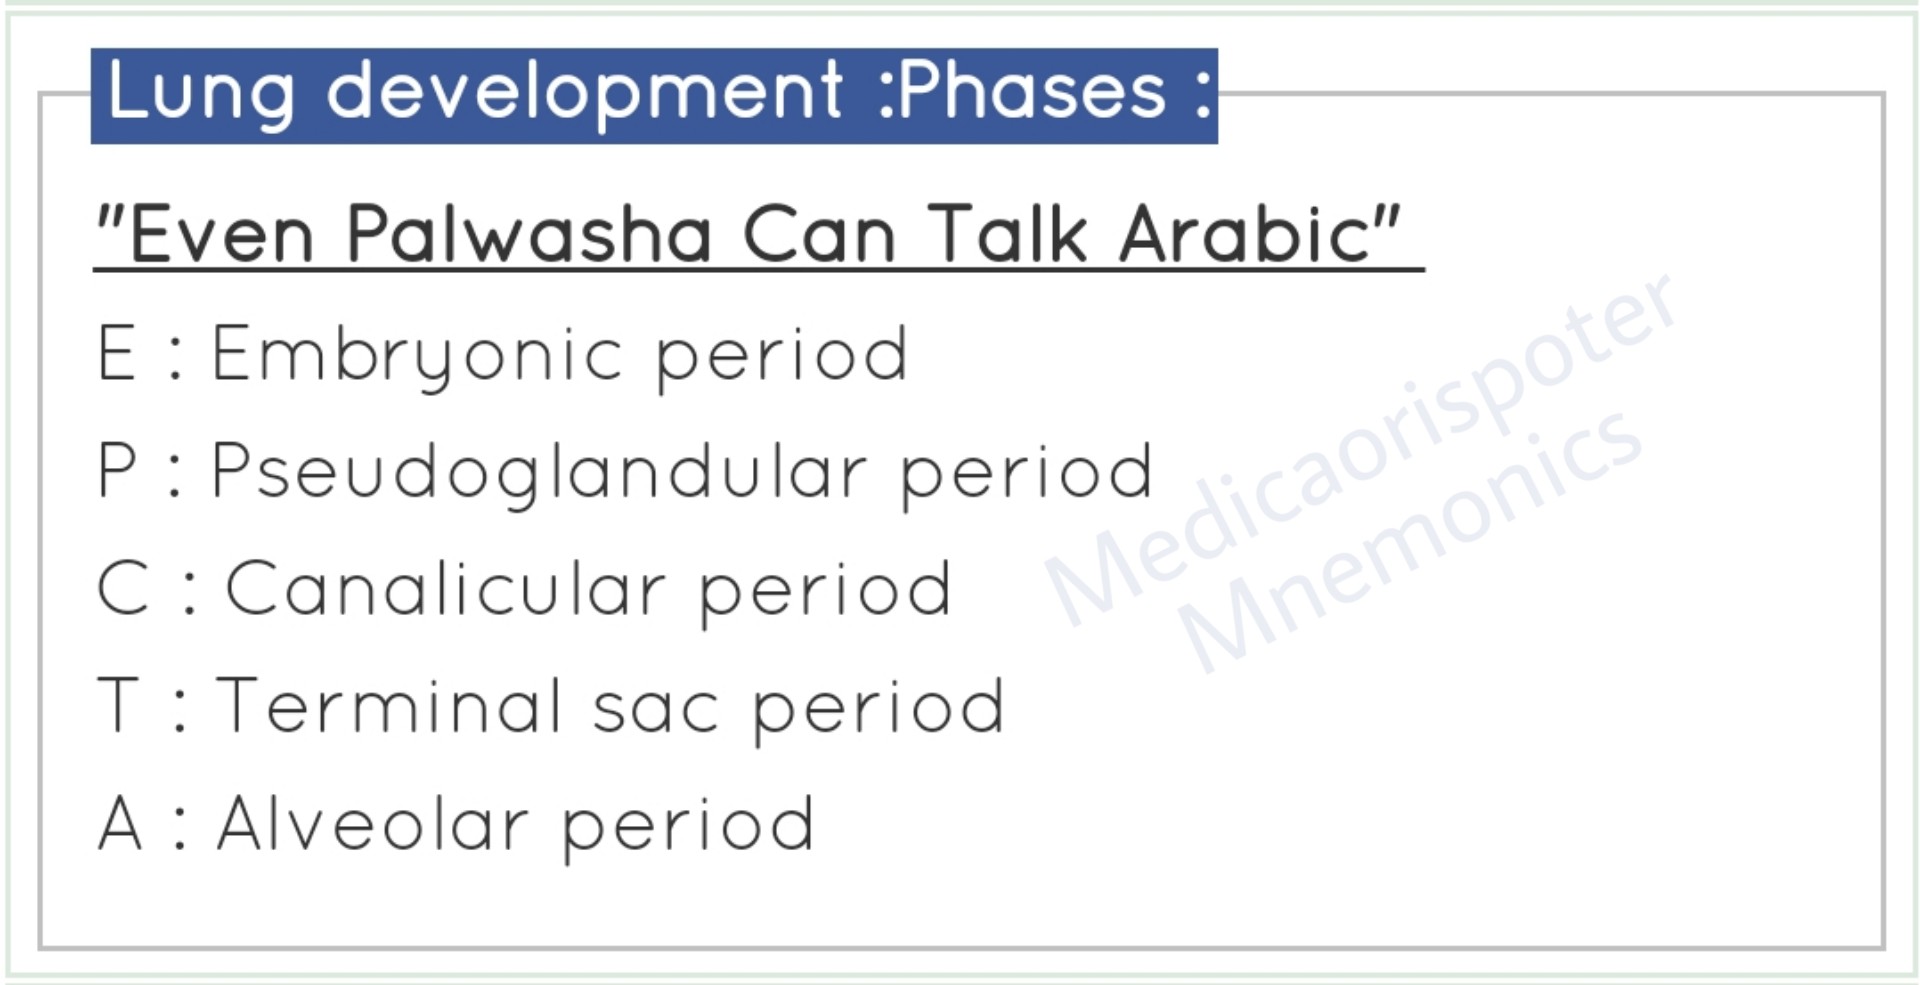 Phases of Lung Development